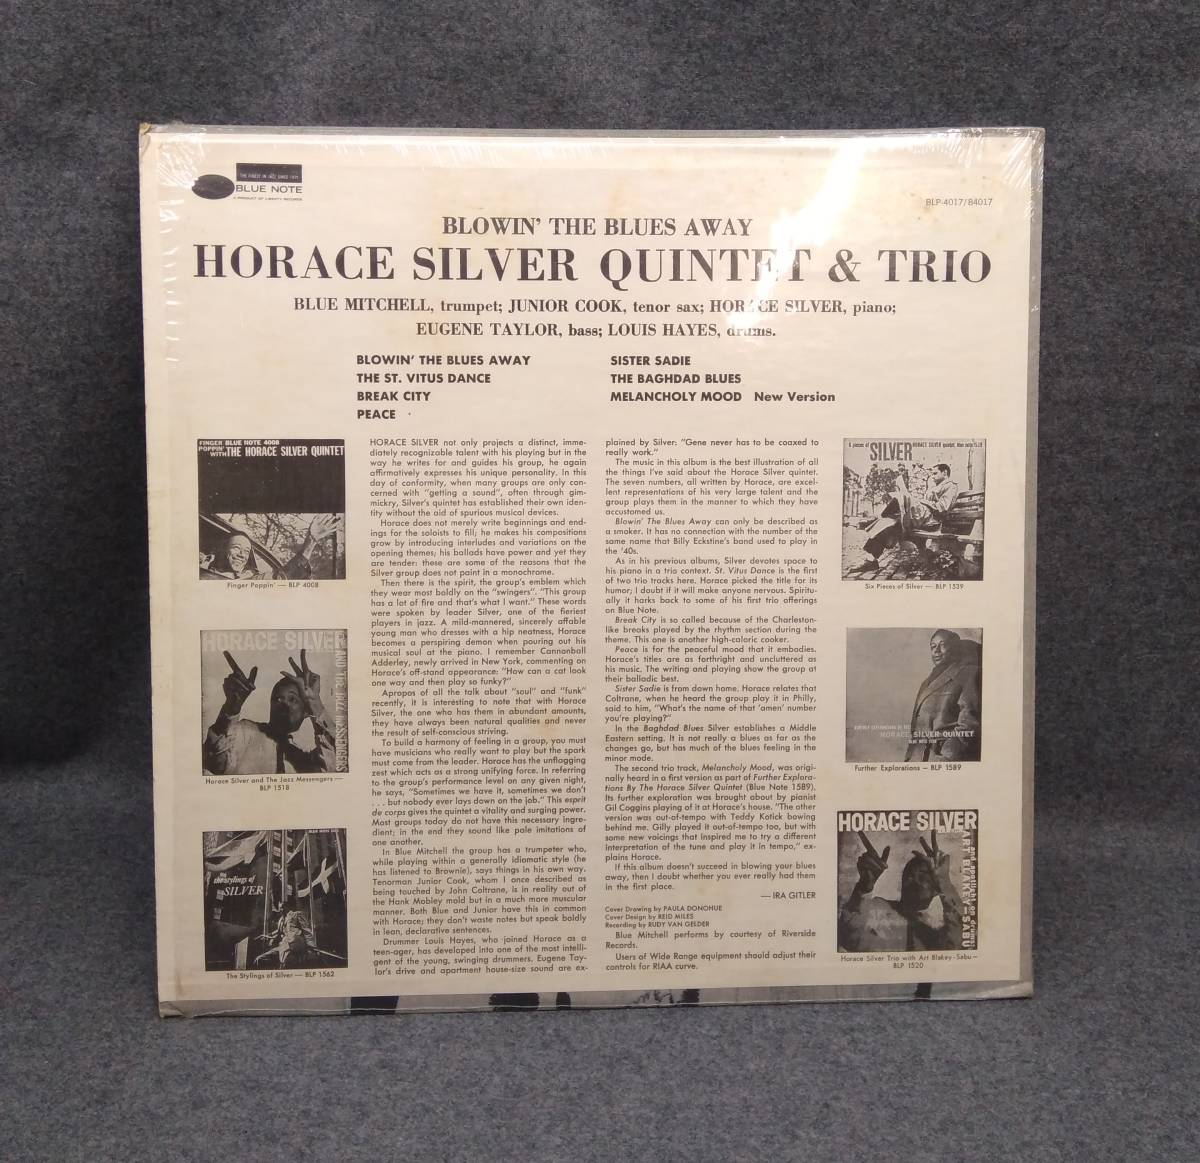 The Horace Silver Quintet&Trio Blowin' The Blues Away ホレス・シルヴァー bst84017 blp4017 レコード LP 店舗受取可_画像2